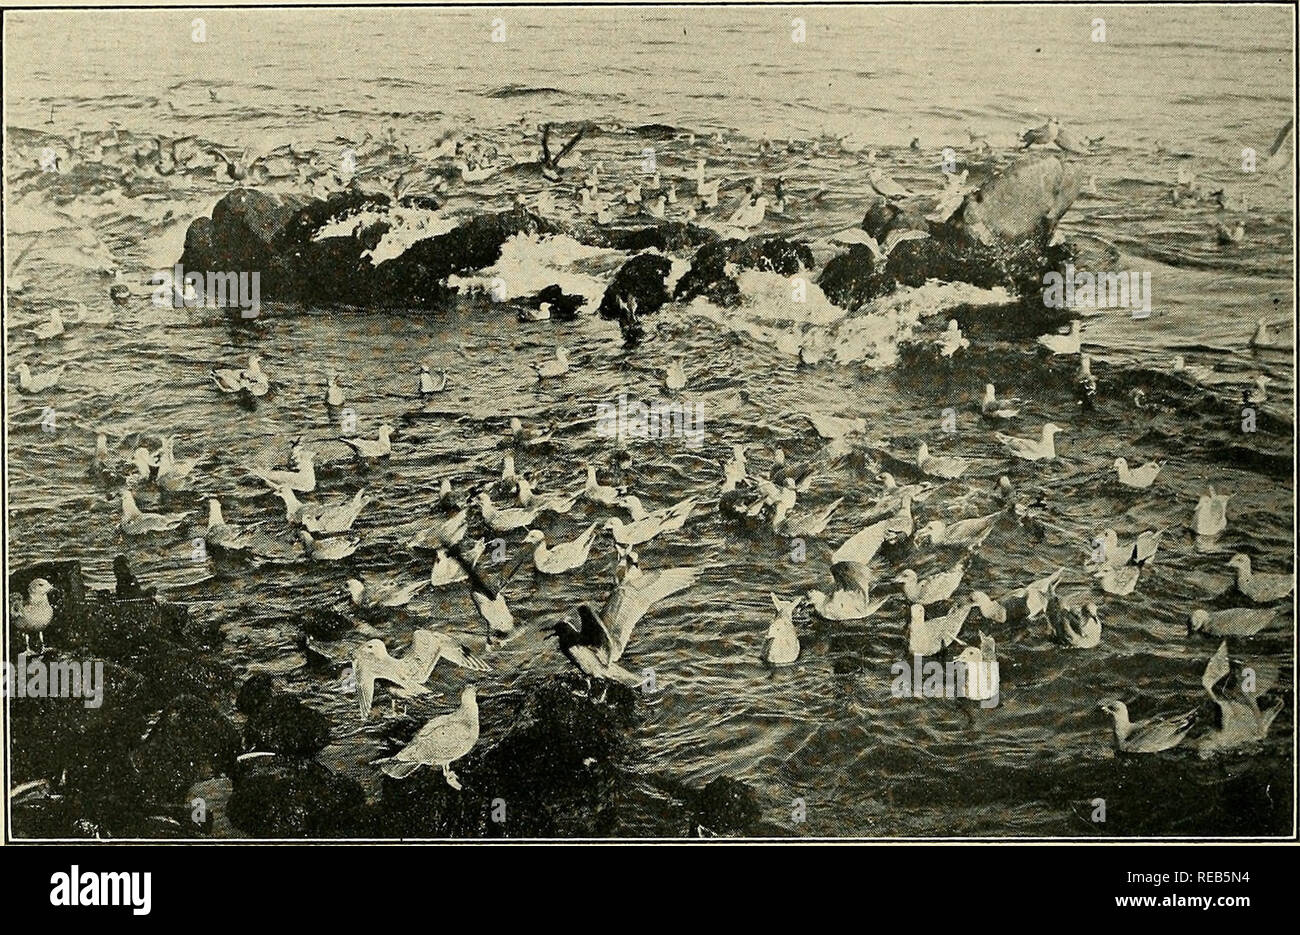 . The condor. Birds; Birds; Birds. 92 THE CONDOR Vol. IX the picture belong to these species. At that particular time (December, 1903) sea- birds were unusually numerous in Monterey Bay, owing to the presence of schools of herrings. Stanford University, California.. GULLS FEEDING ON GARBAGE NEAR MONTEREY; 184 BIRDS IN THE PICTURE NOTES FROM THE PHITIPPINES By JOSEPH CLEMENS NOTING the Editor's request for articles, I concluded to send a word. Have had just a little time for collecting, but have taken about 80 species and wish to speak of one—the monkey-eating forest eagle, which Mr. W. R. Ogil Stock Photo